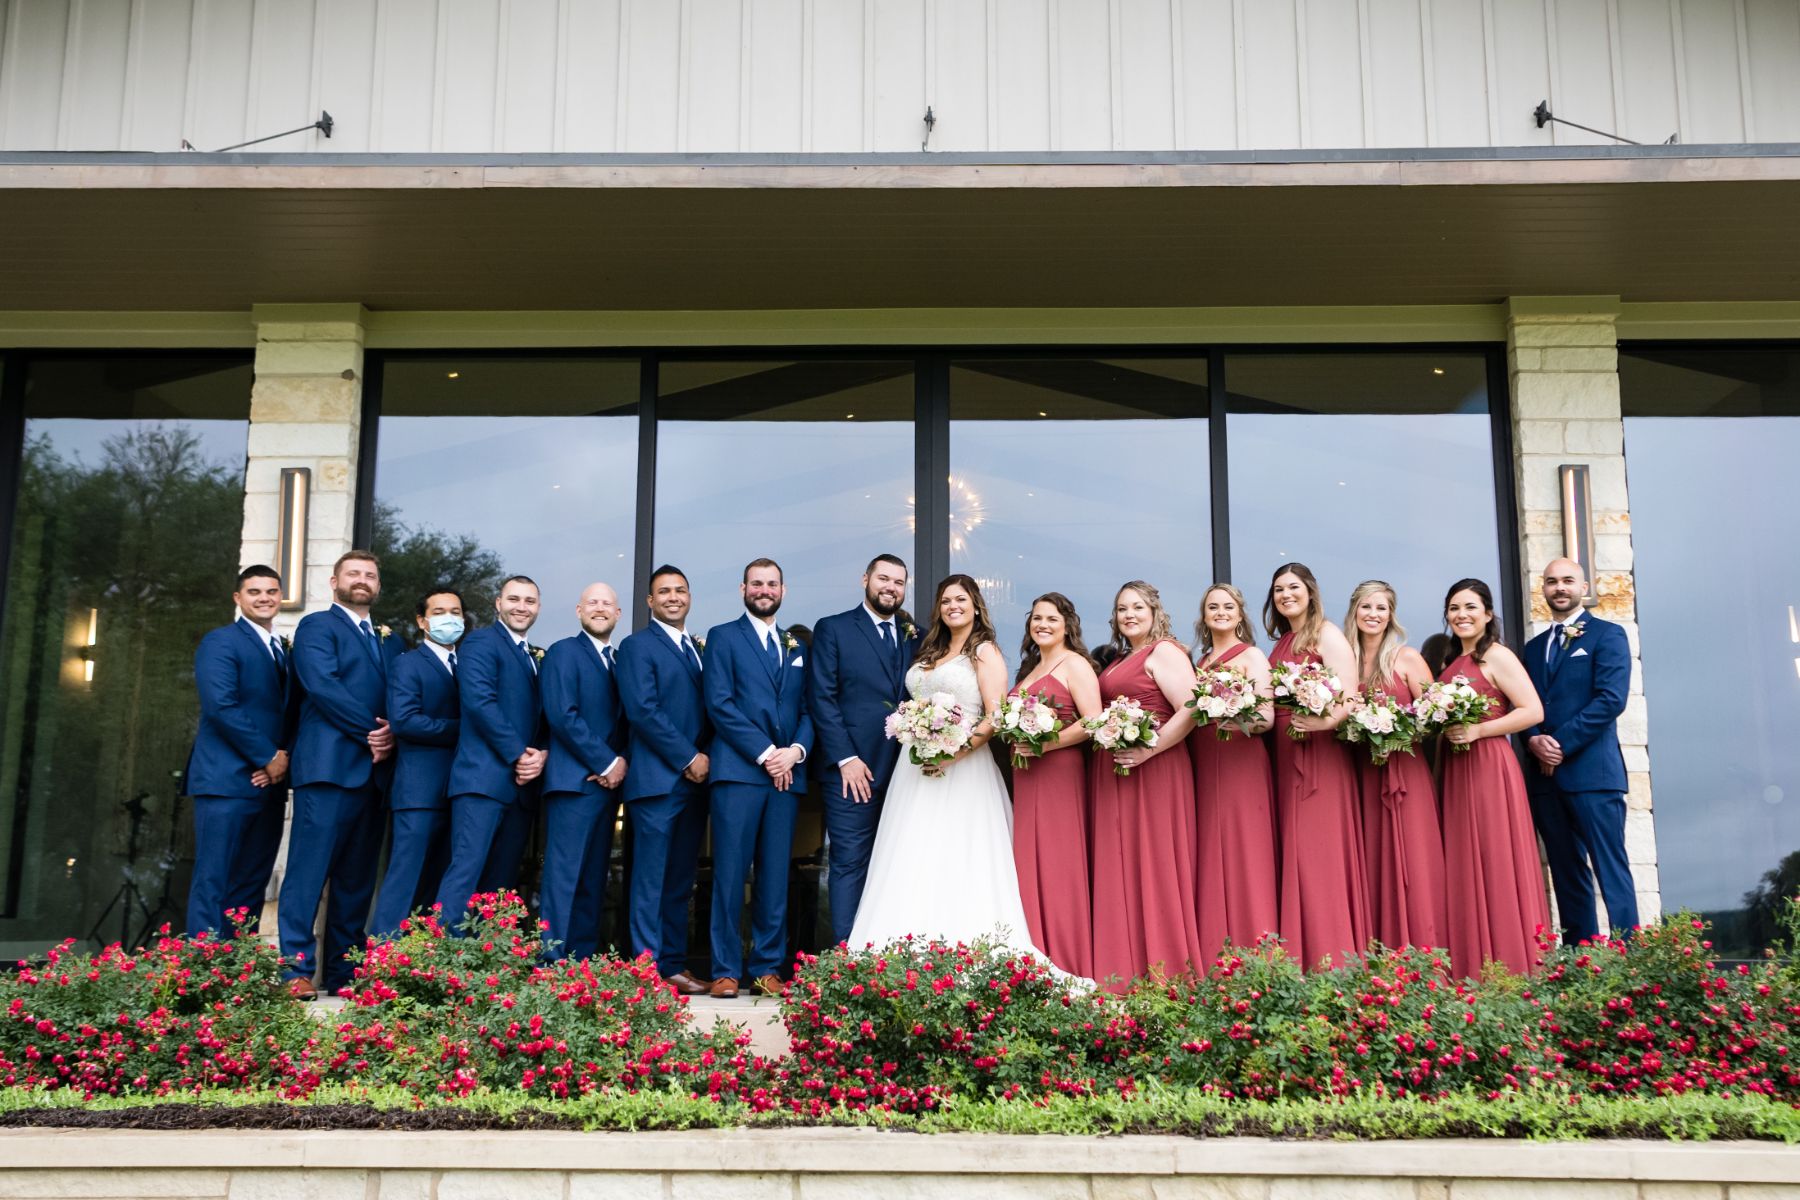 Bride and groom with their bridal party are lined up in front of a limestone building with large windows at Stonehouse Villa.